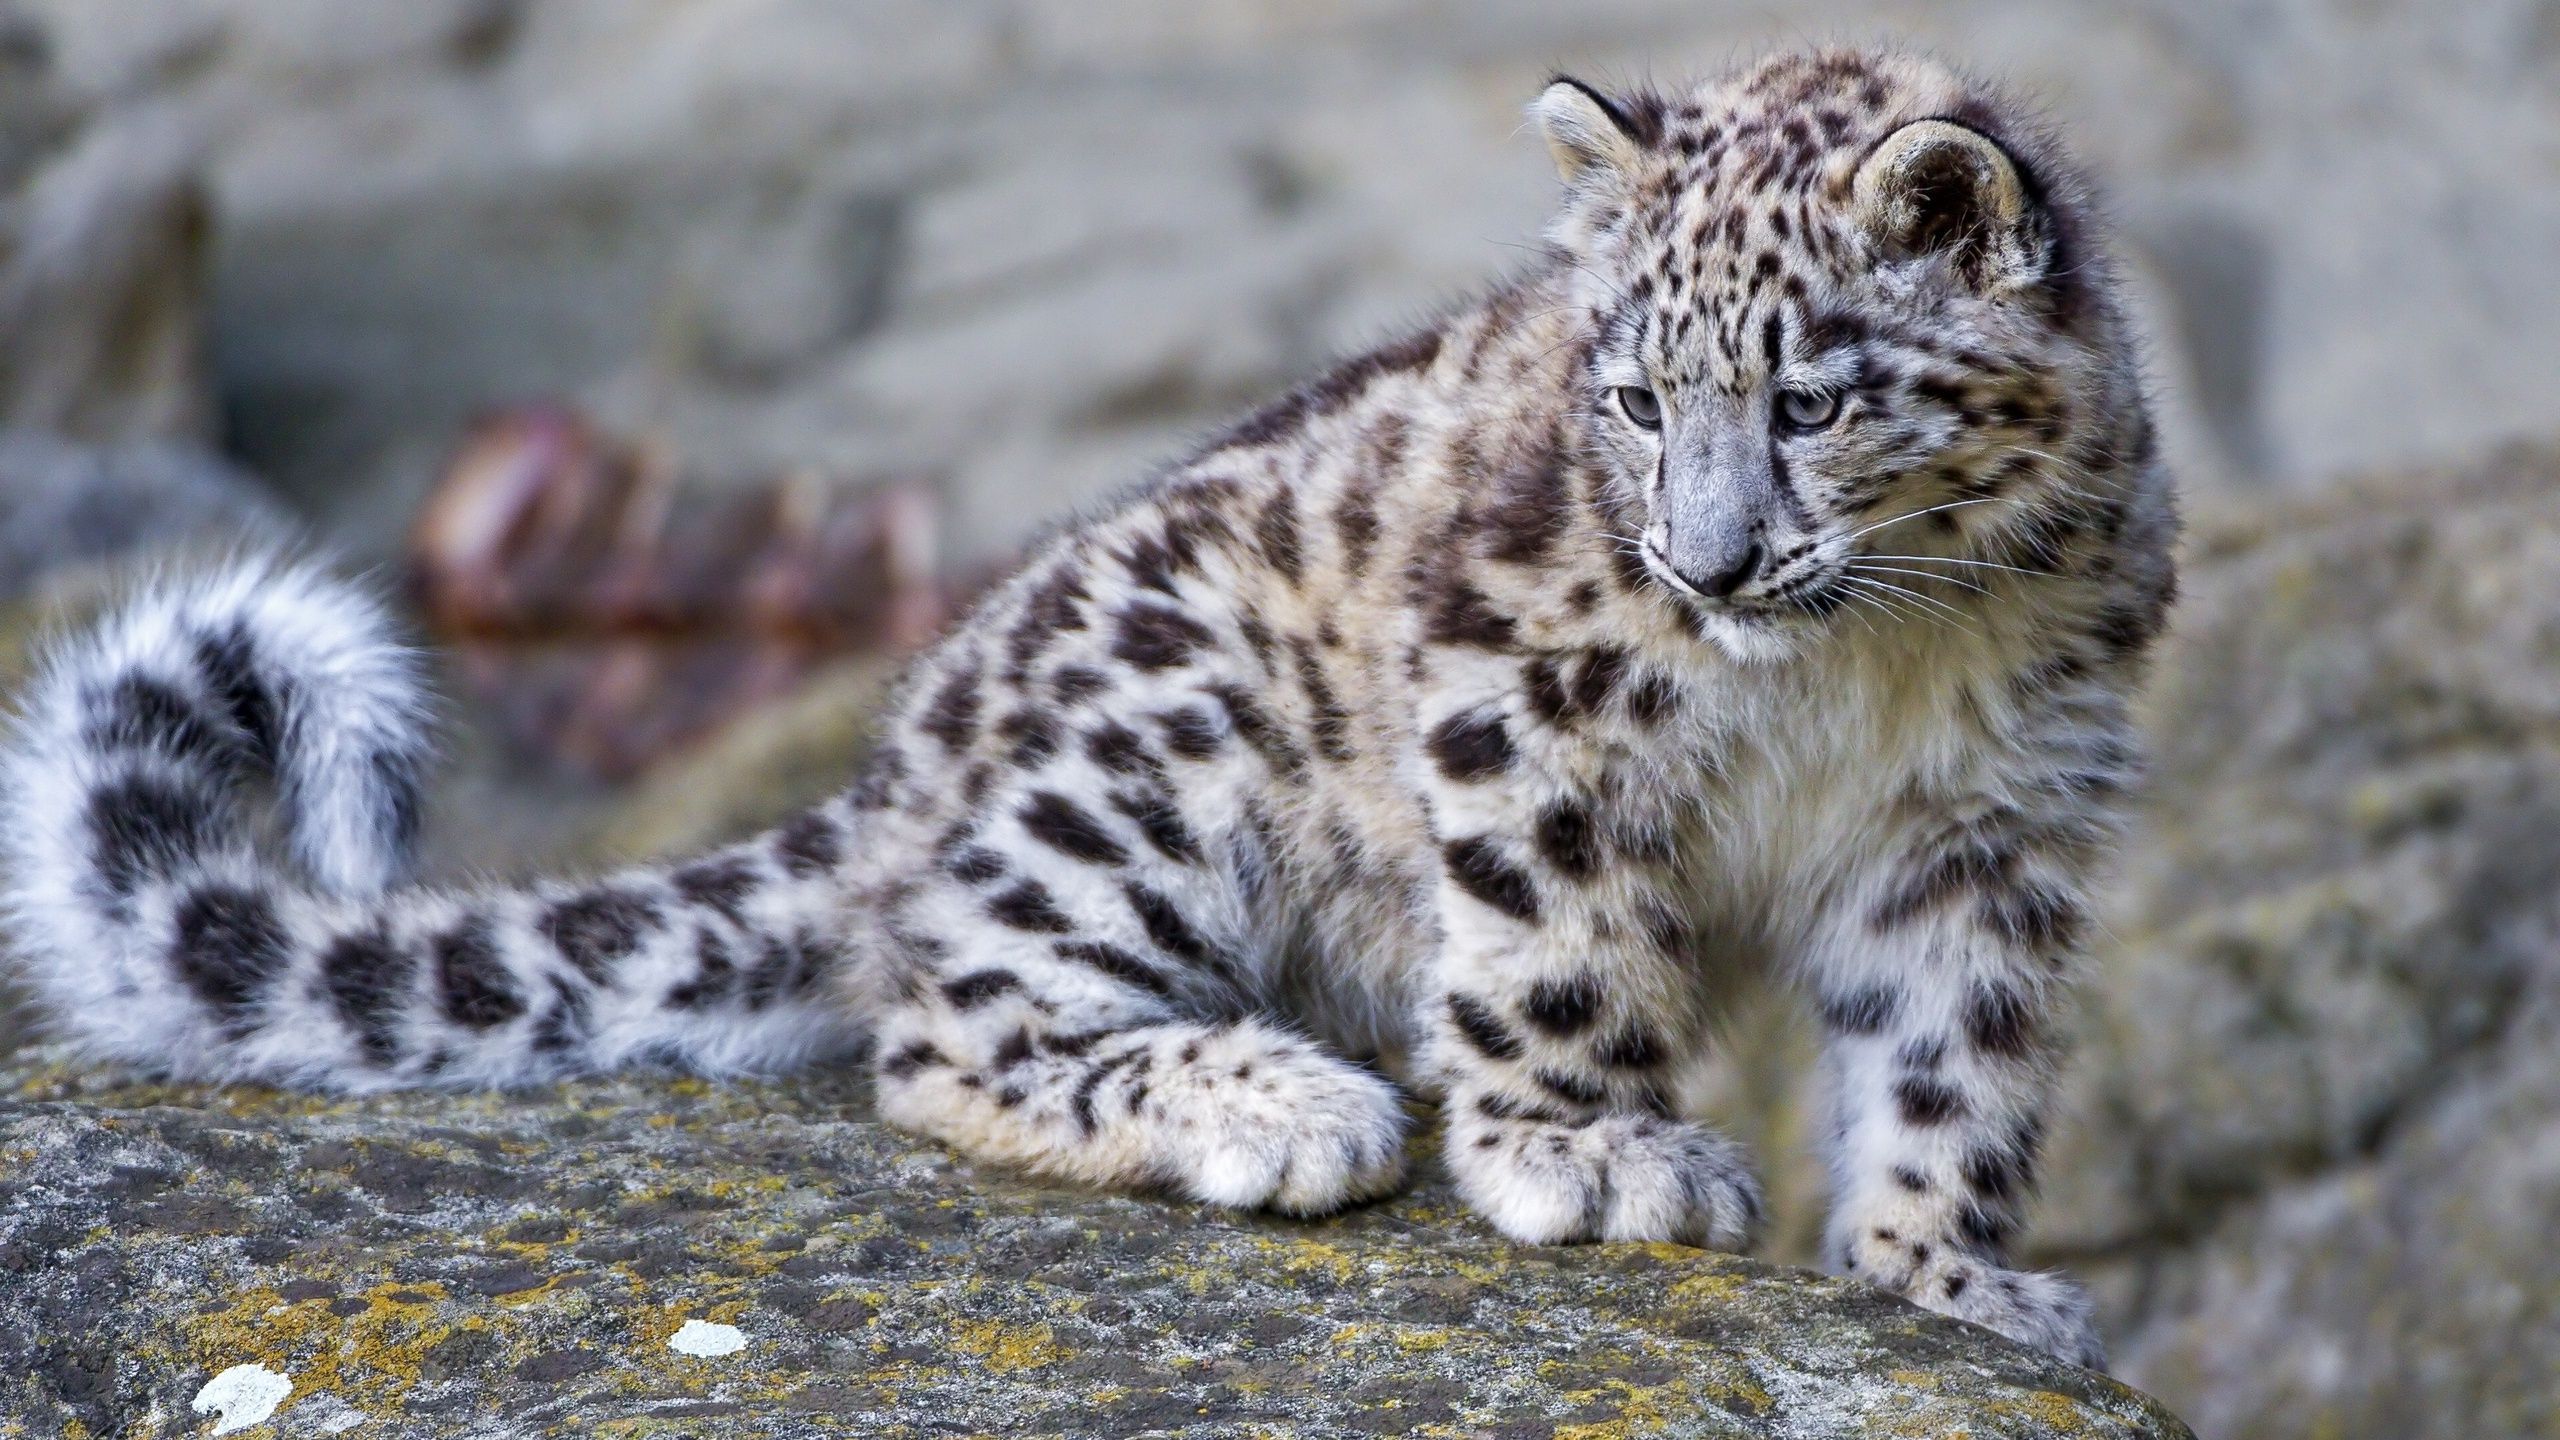 Gallery For Gt Baby Snow Leopard Wallpaper